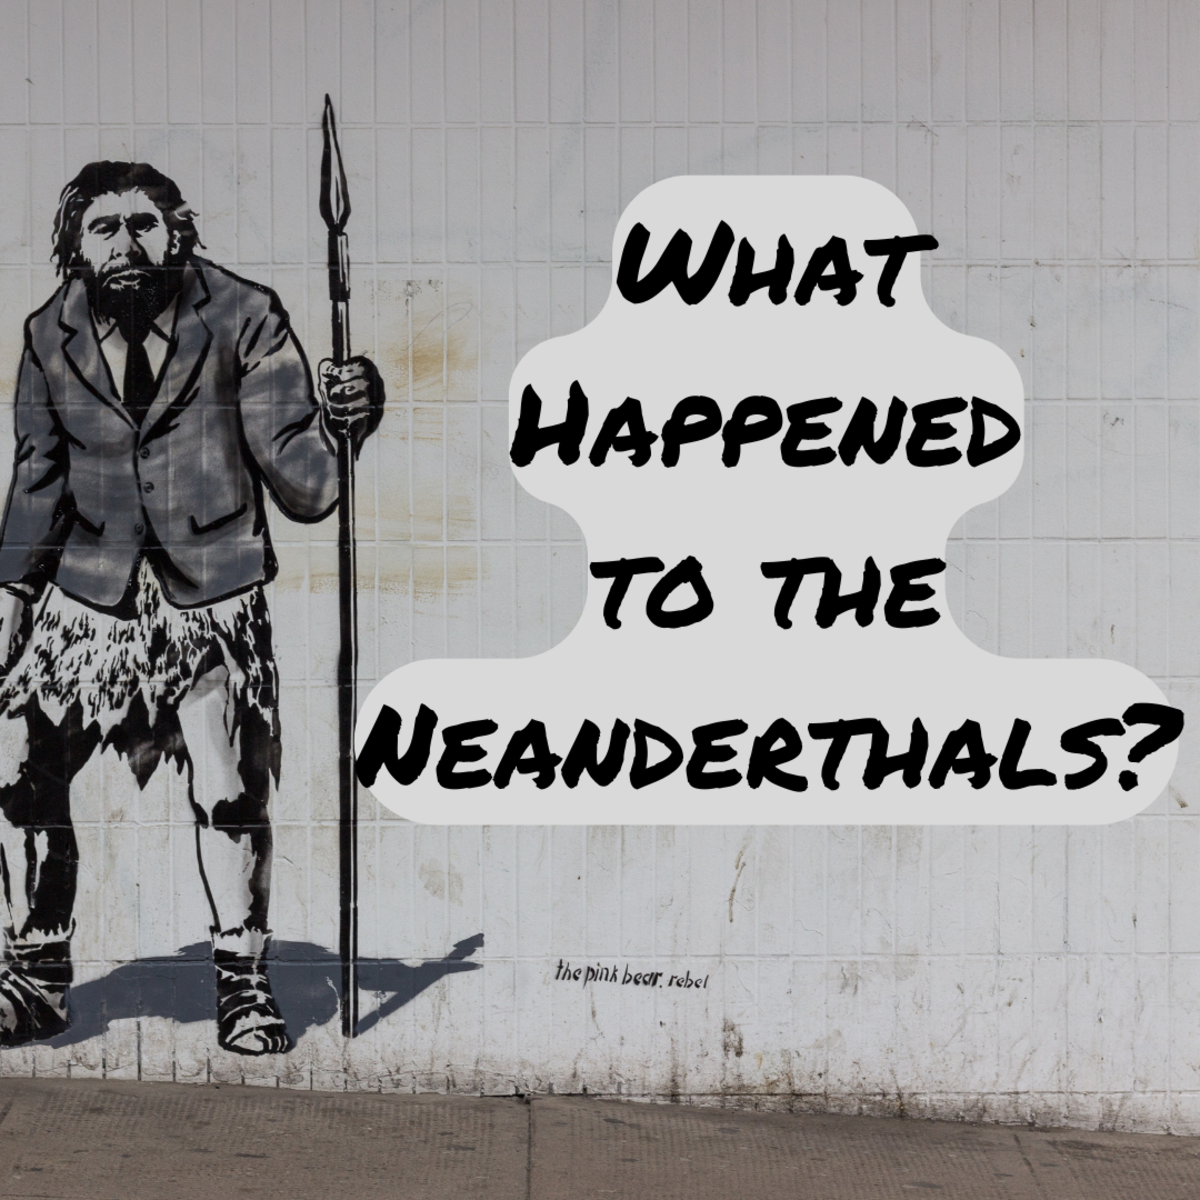 Read on to learn some various theories about what led to the Neanderthal extinction 40,000 years ago.